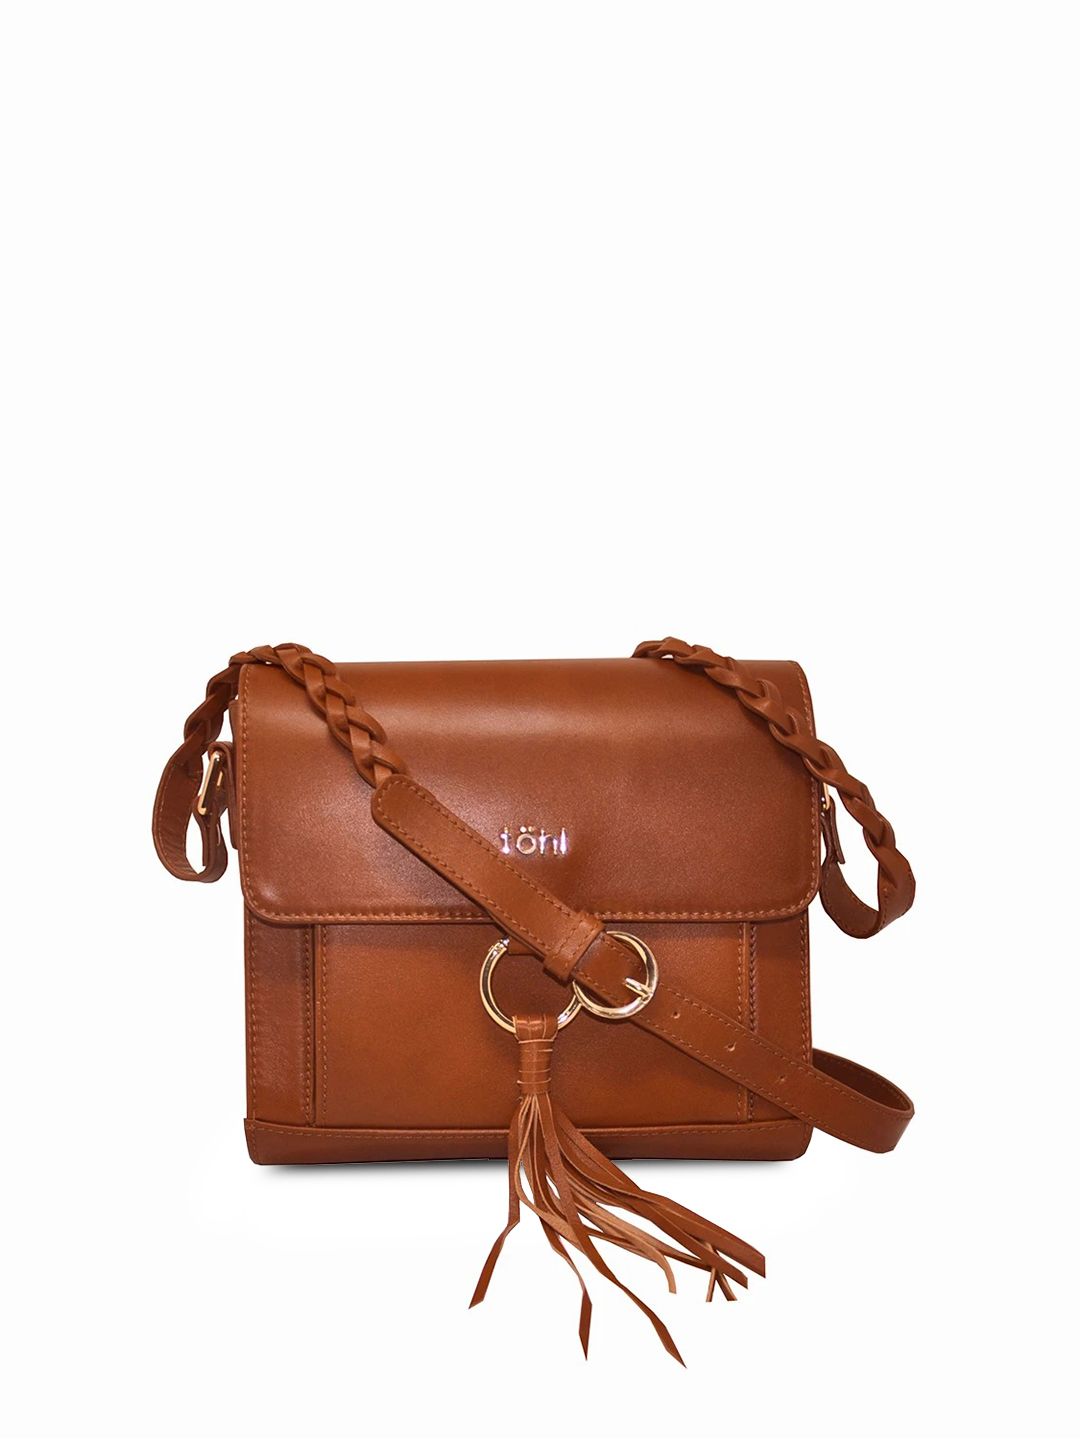 tohl Tan Solid Sling Bag Price in India